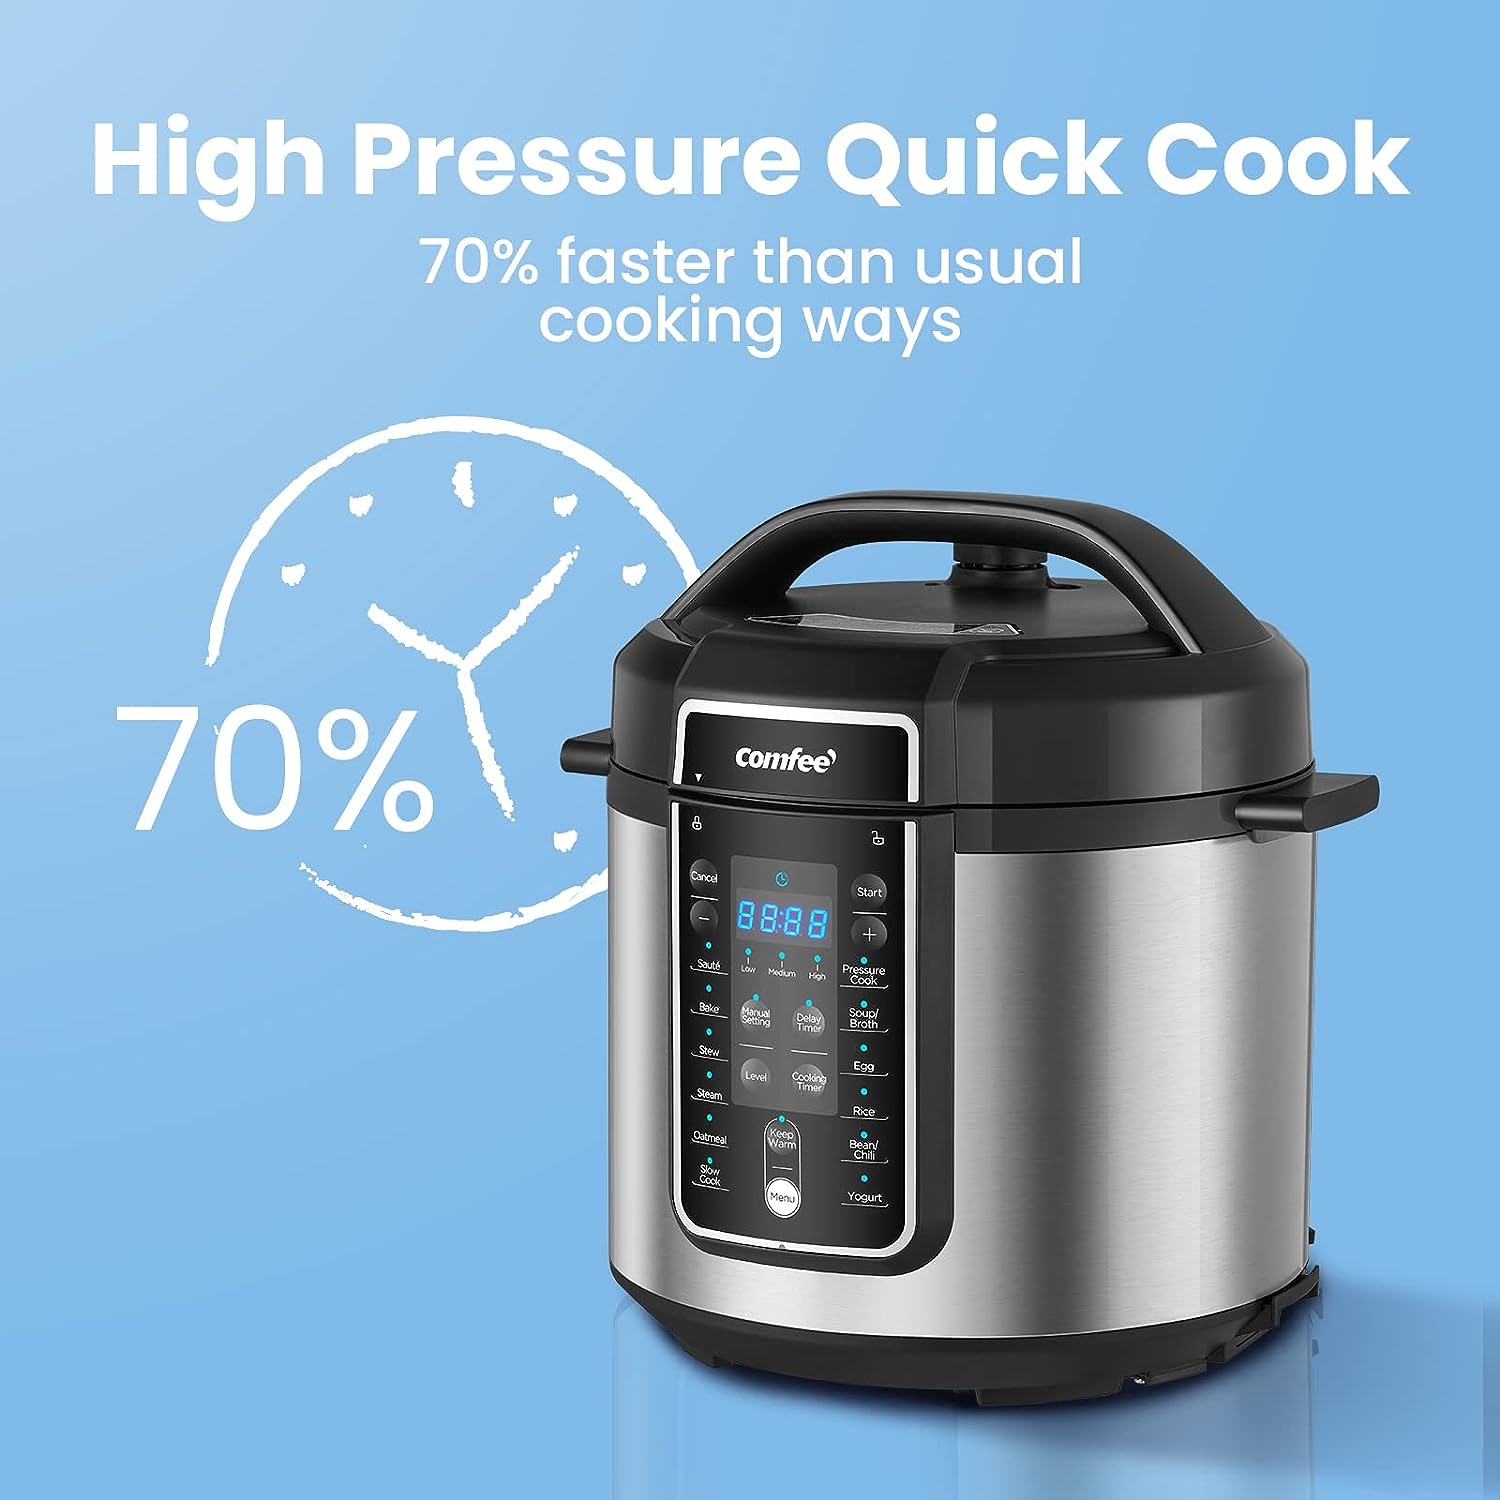 https://bigbigmart.com/wp-content/uploads/2023/08/COMFEE-Pressure-Cooker-6-Quart-with-12-Presets-Multi-Functional-Programmable-Slow-Cooker-Rice-Cooker-Steamer-Saute-pan-Egg-Cooker-Warmer-and-More3.jpg